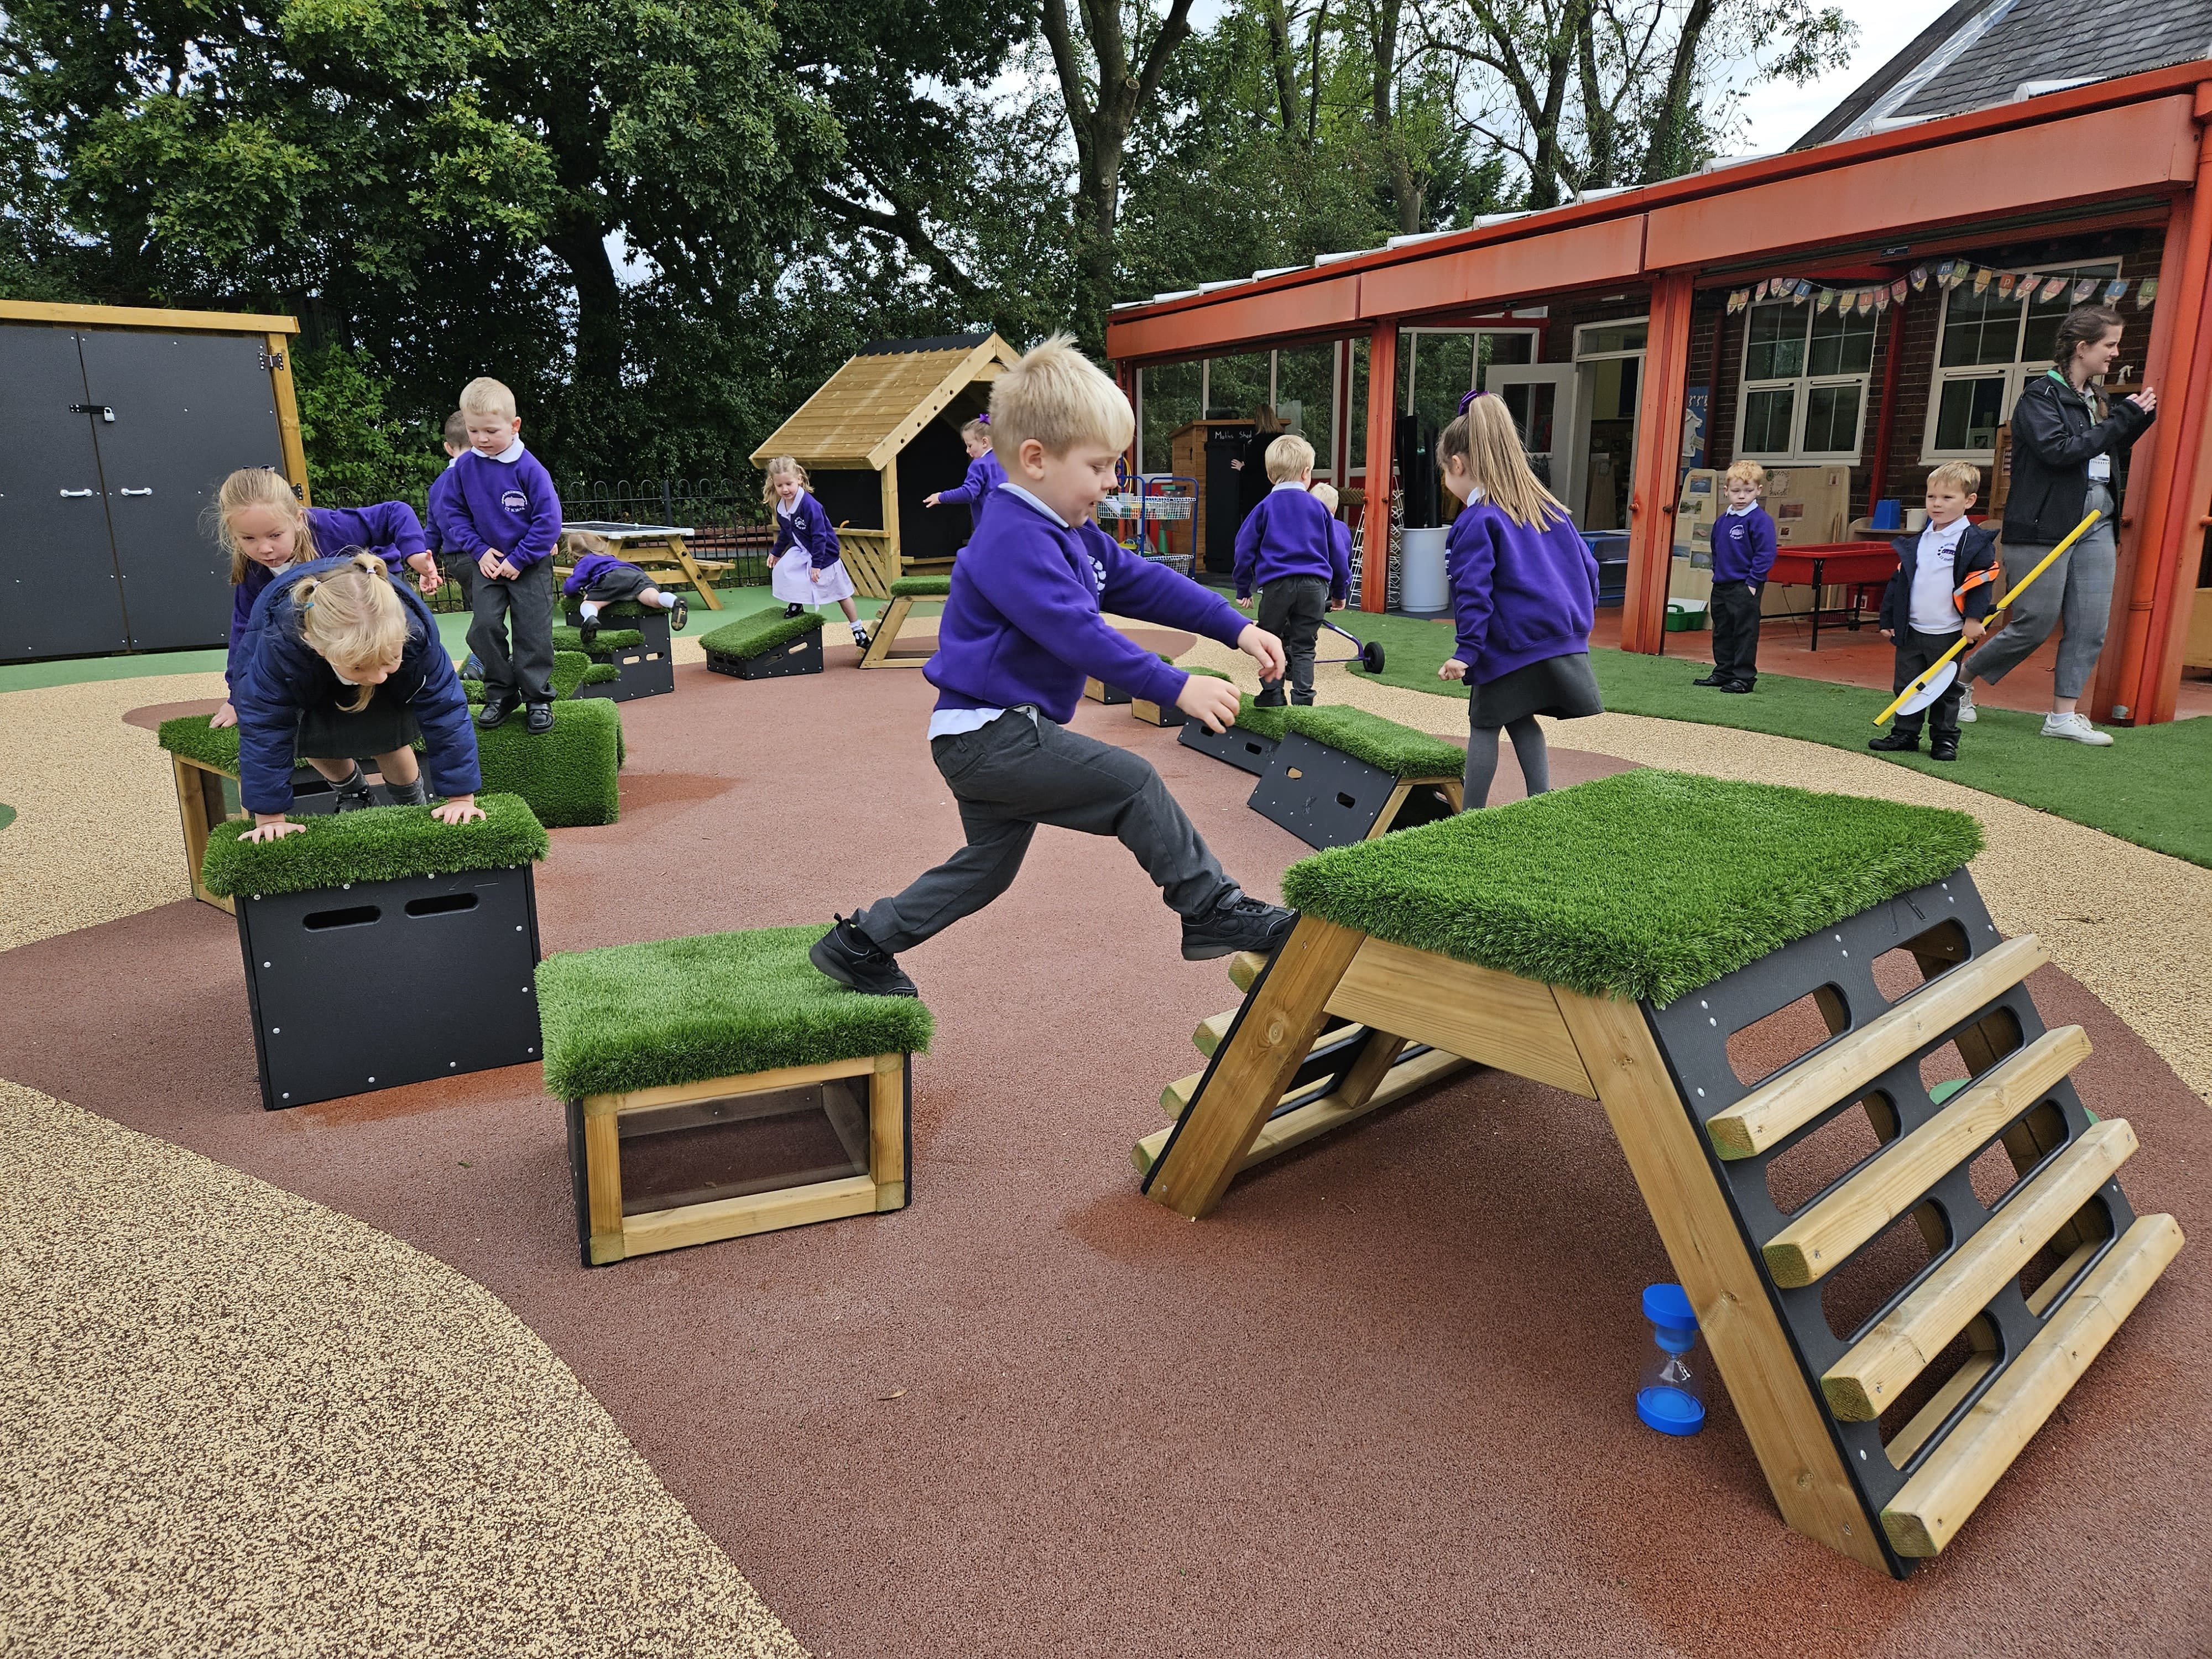 13 children are playing on the Get Set, Go! Blocks set, the Cheviot. The blocks are all different shapes and sizes, creating an exciting obstacle course for the kids.